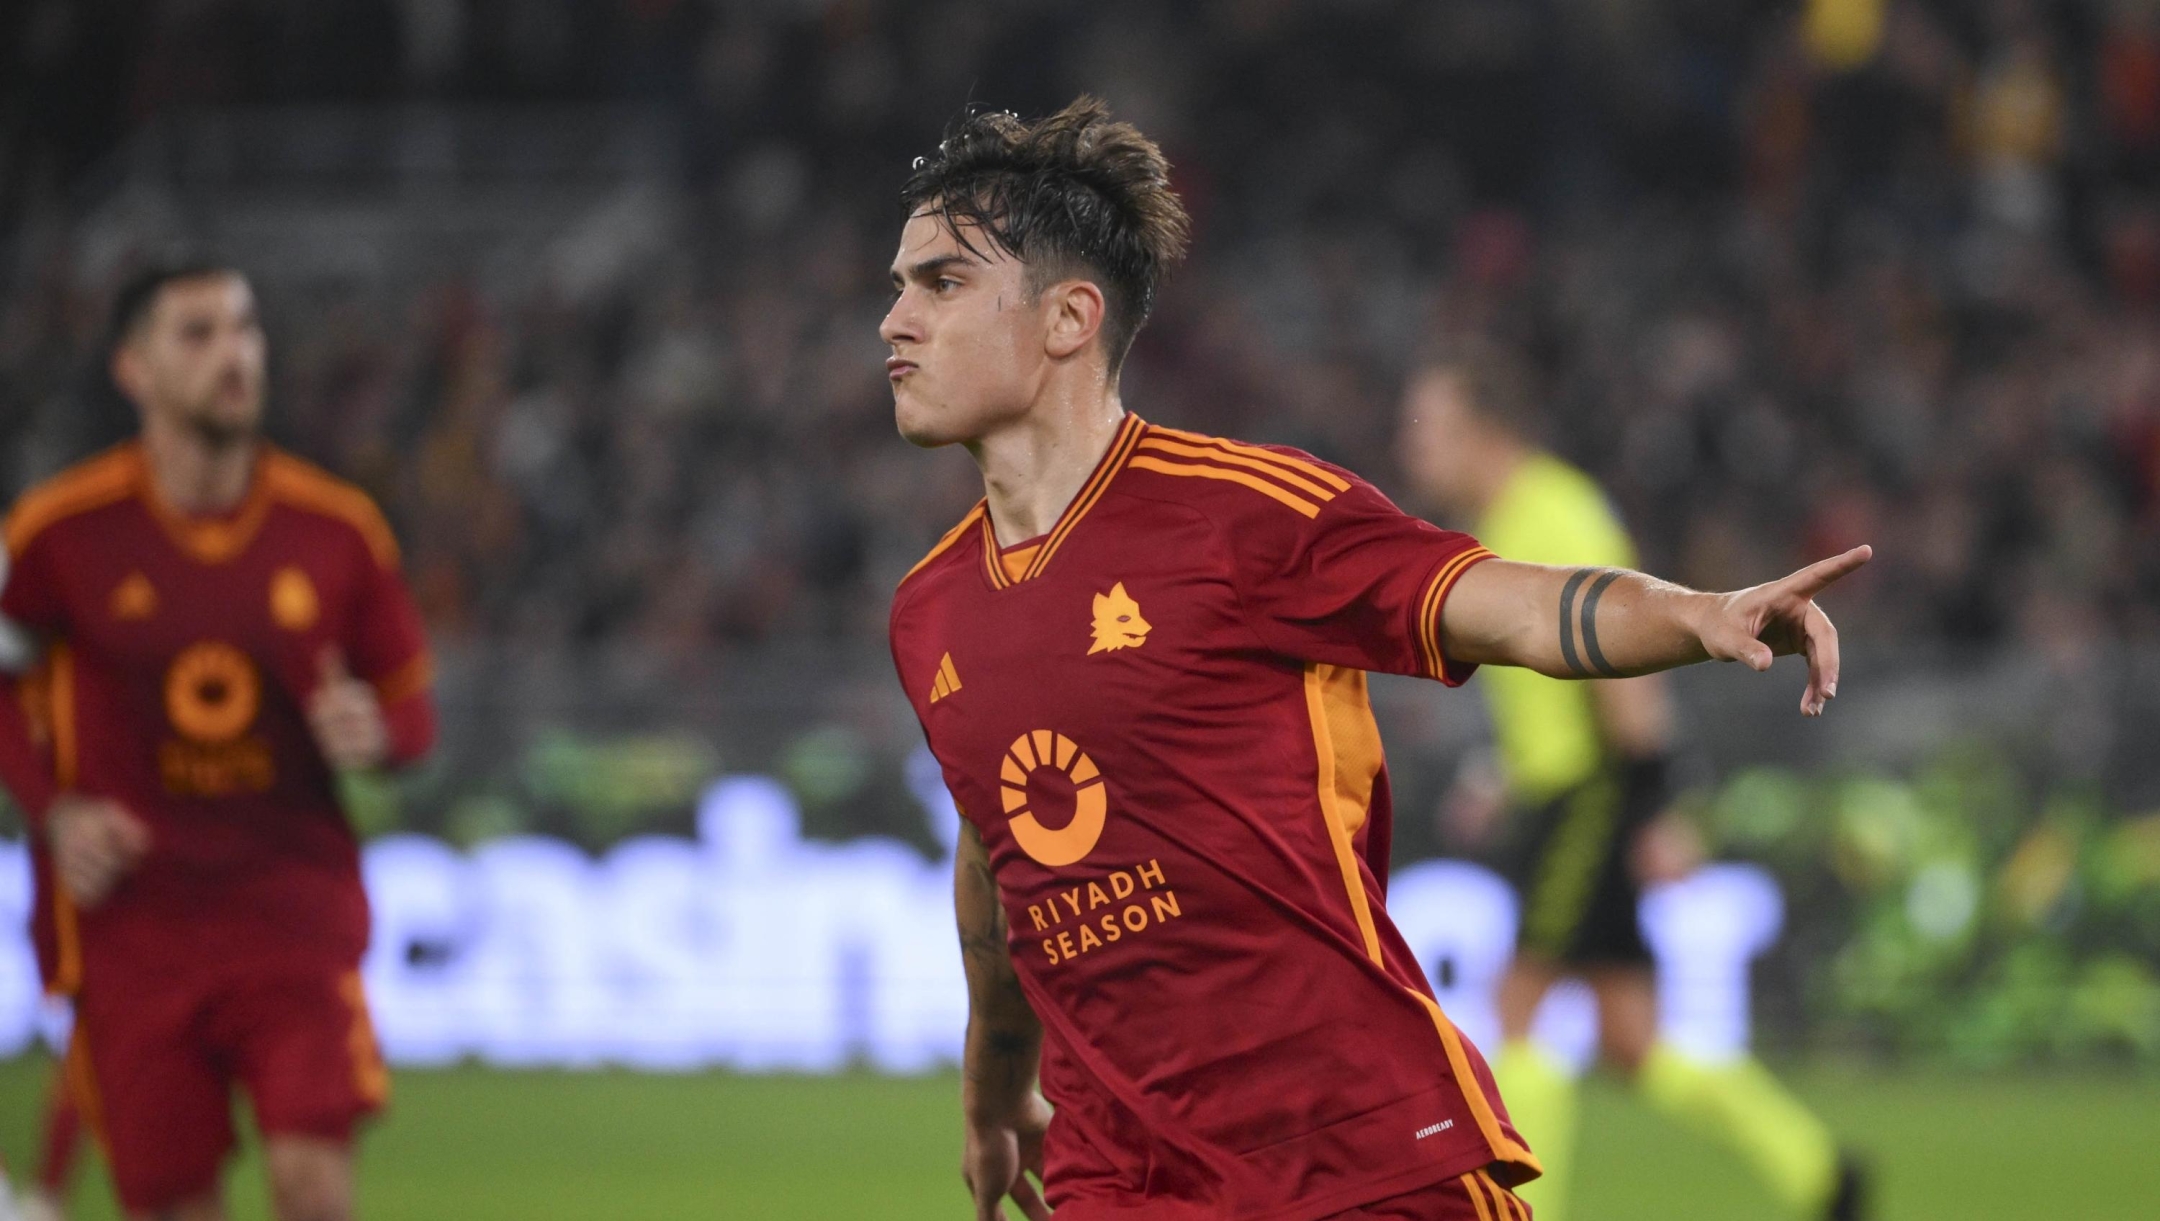 ROME, ITALY - JANUARY 03: AS Roma player Paulo Dybala celebratesduring the Coppa Italia Round of 16 match between AS Roma and Cremonese at Stadio Olimpico on January 03, 2024 in Rome, Italy. (Photo by Luciano Rossi/AS Roma via Getty Images)